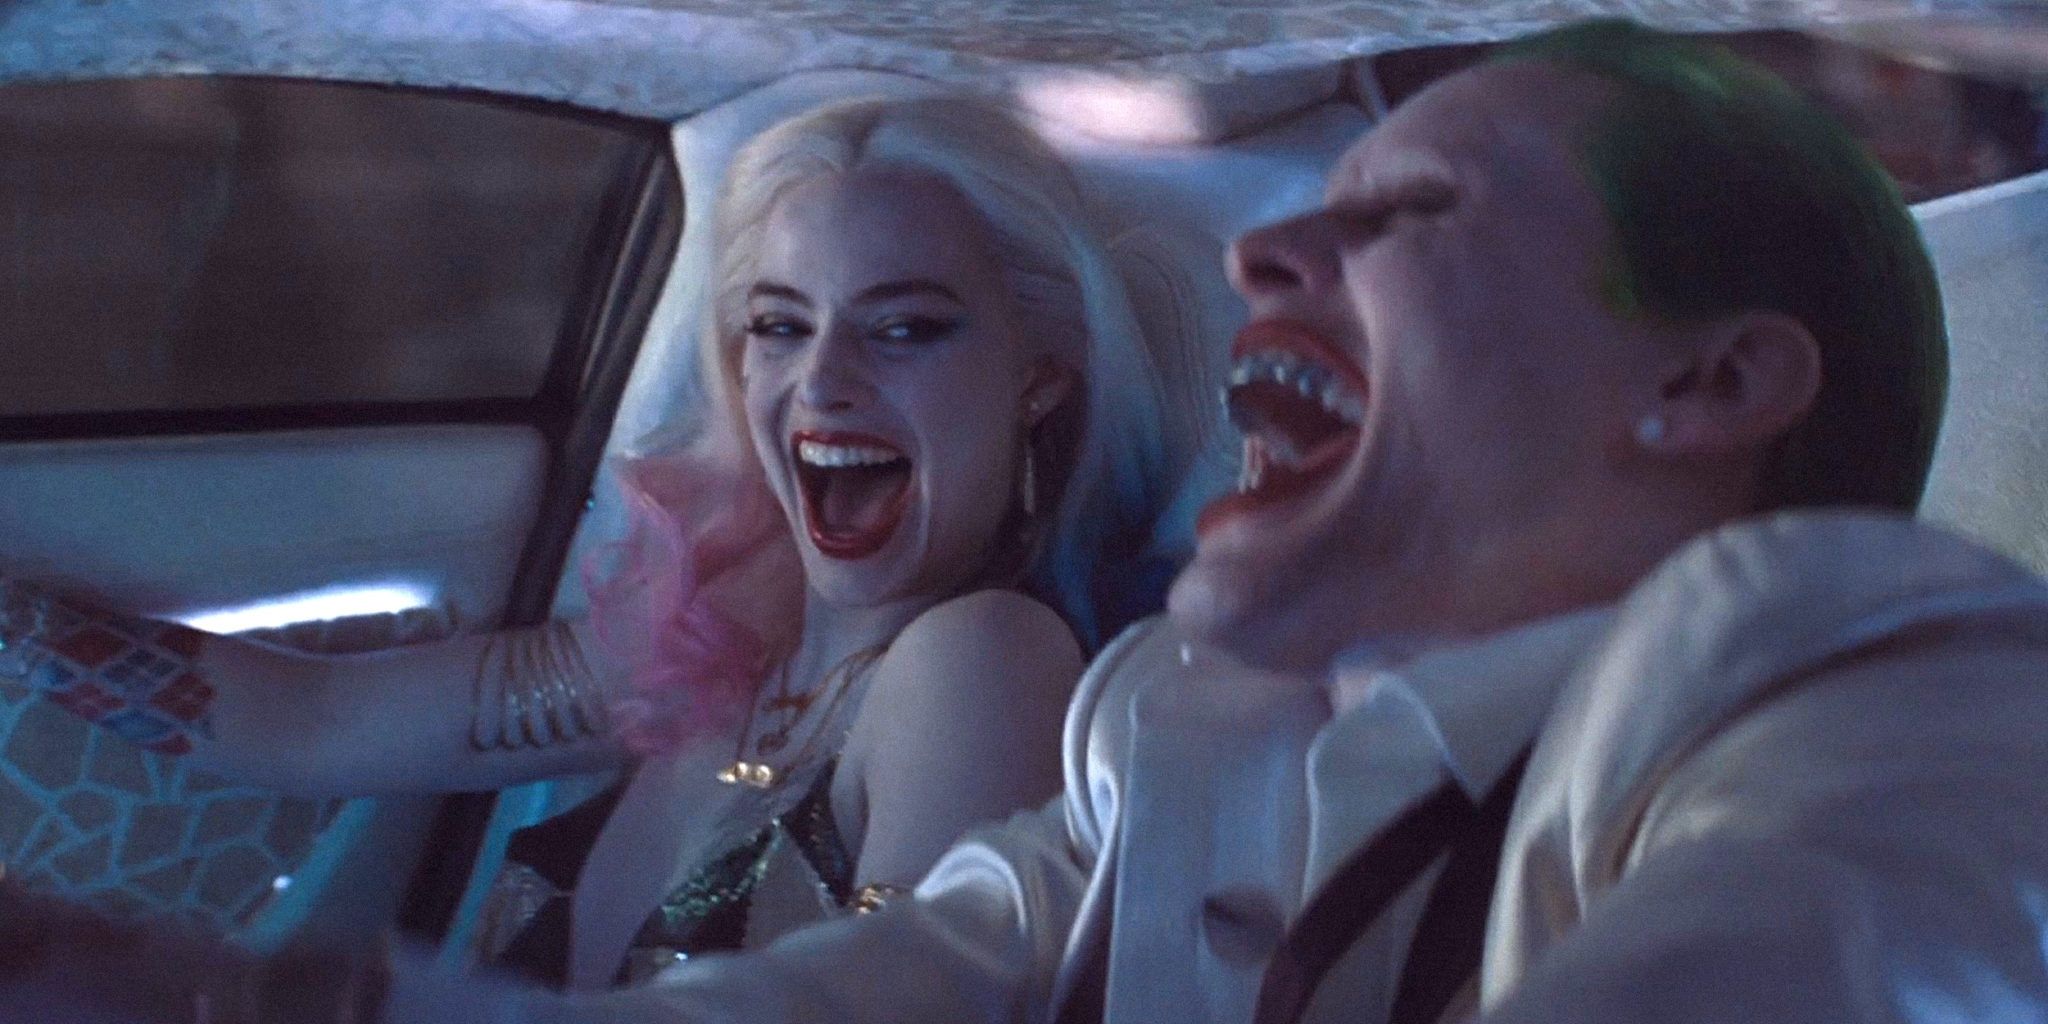 Harley Quinn 5 Reasons Why Harley Quinns Better With The Joker (& 5 Reasons Why Shes Better Solo)